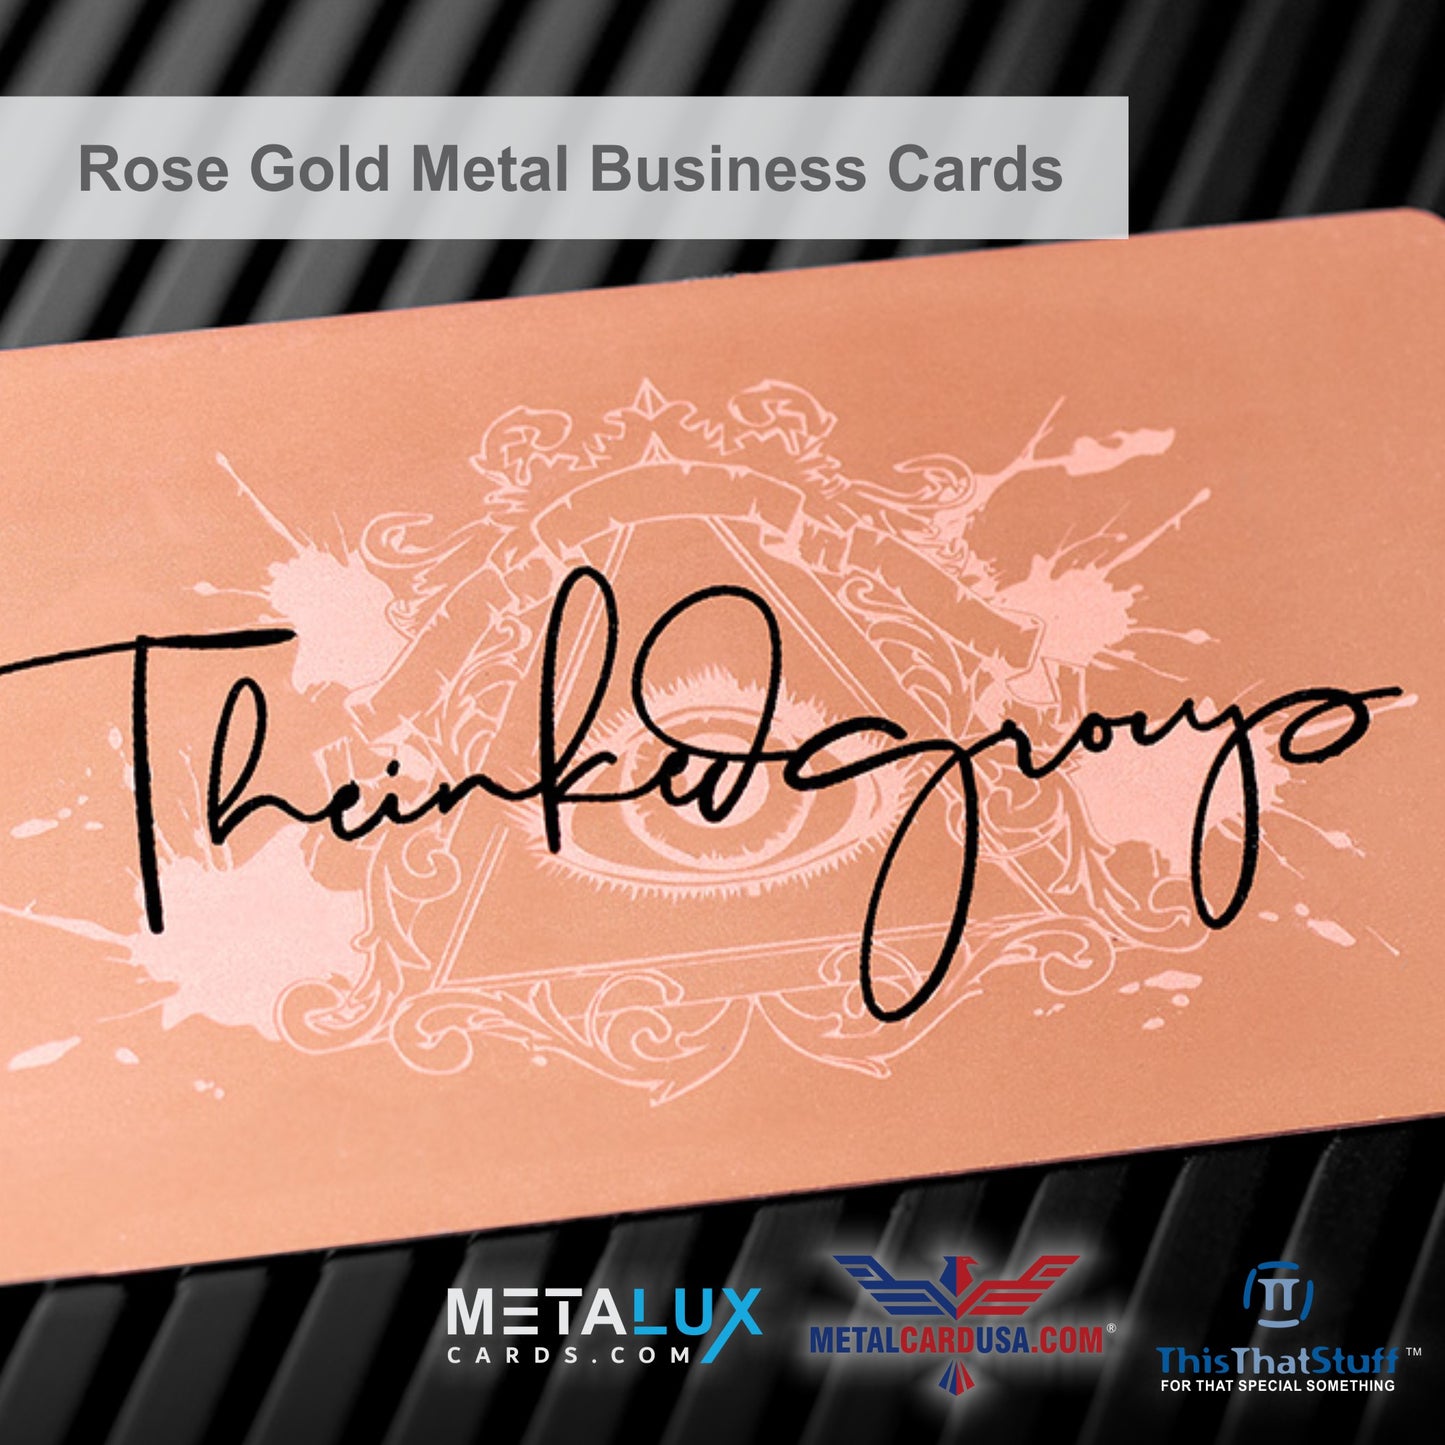 Metalux Rose Gold Metal Business Cards | Membership Cards | VIP Cards | Gift Cards | Special Events